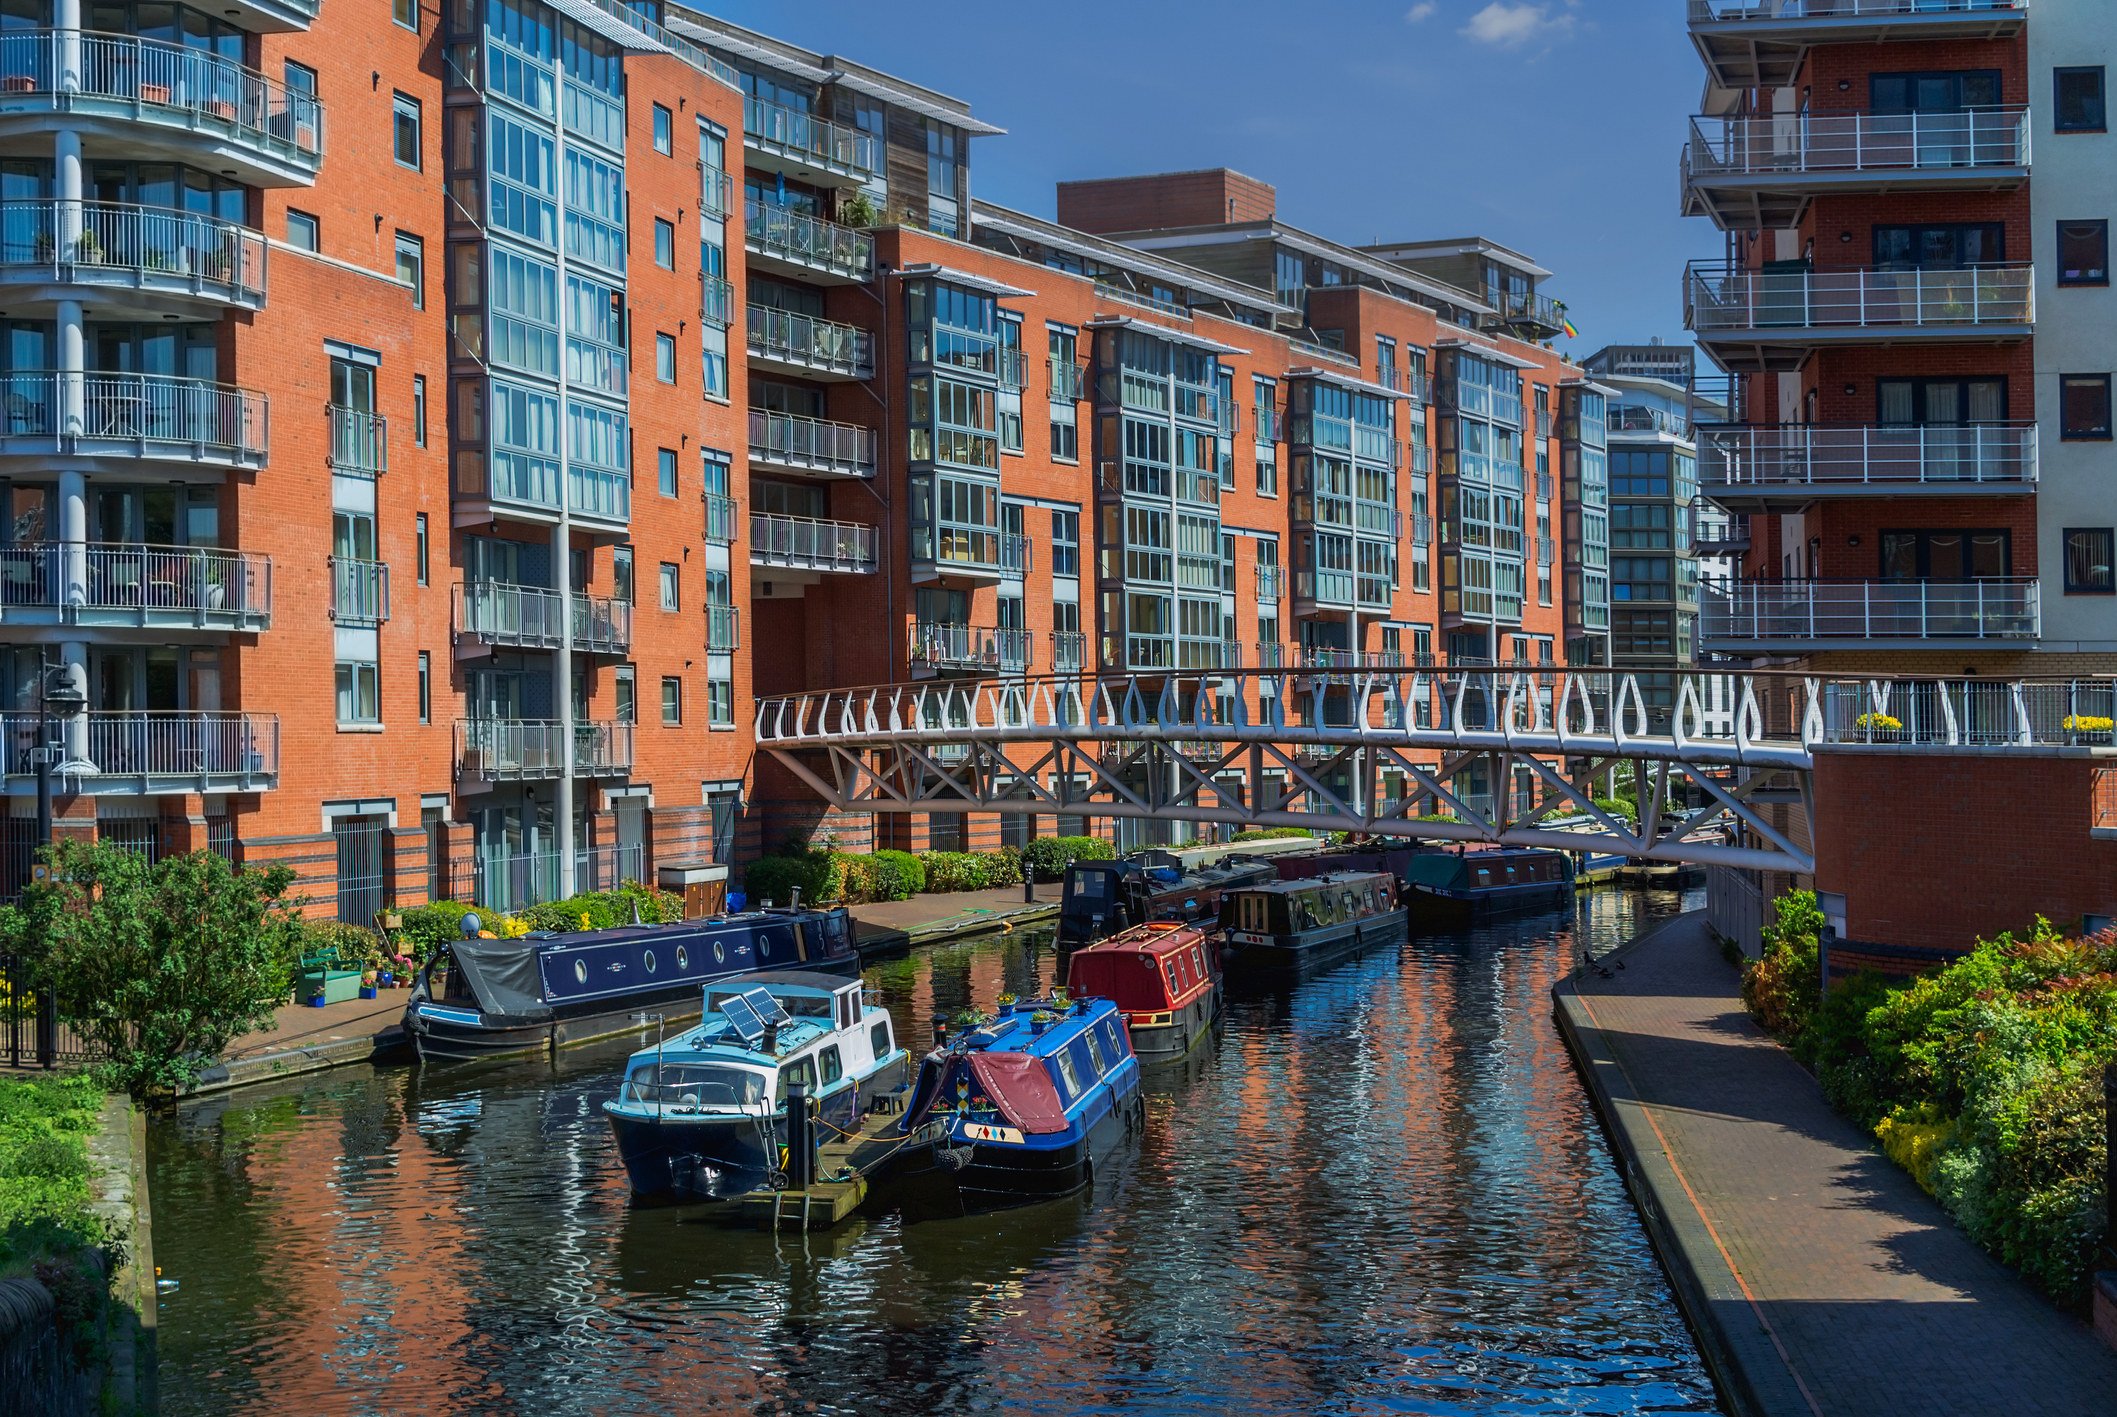 Apartments alongside the canal in the city centre of Birmingham. The rapidly weakening pound and the Hong Kong dollar’s recent strength have made Britain an increasingly attractive place for Hongkongers looking to invest overseas. Photo: Getty Images